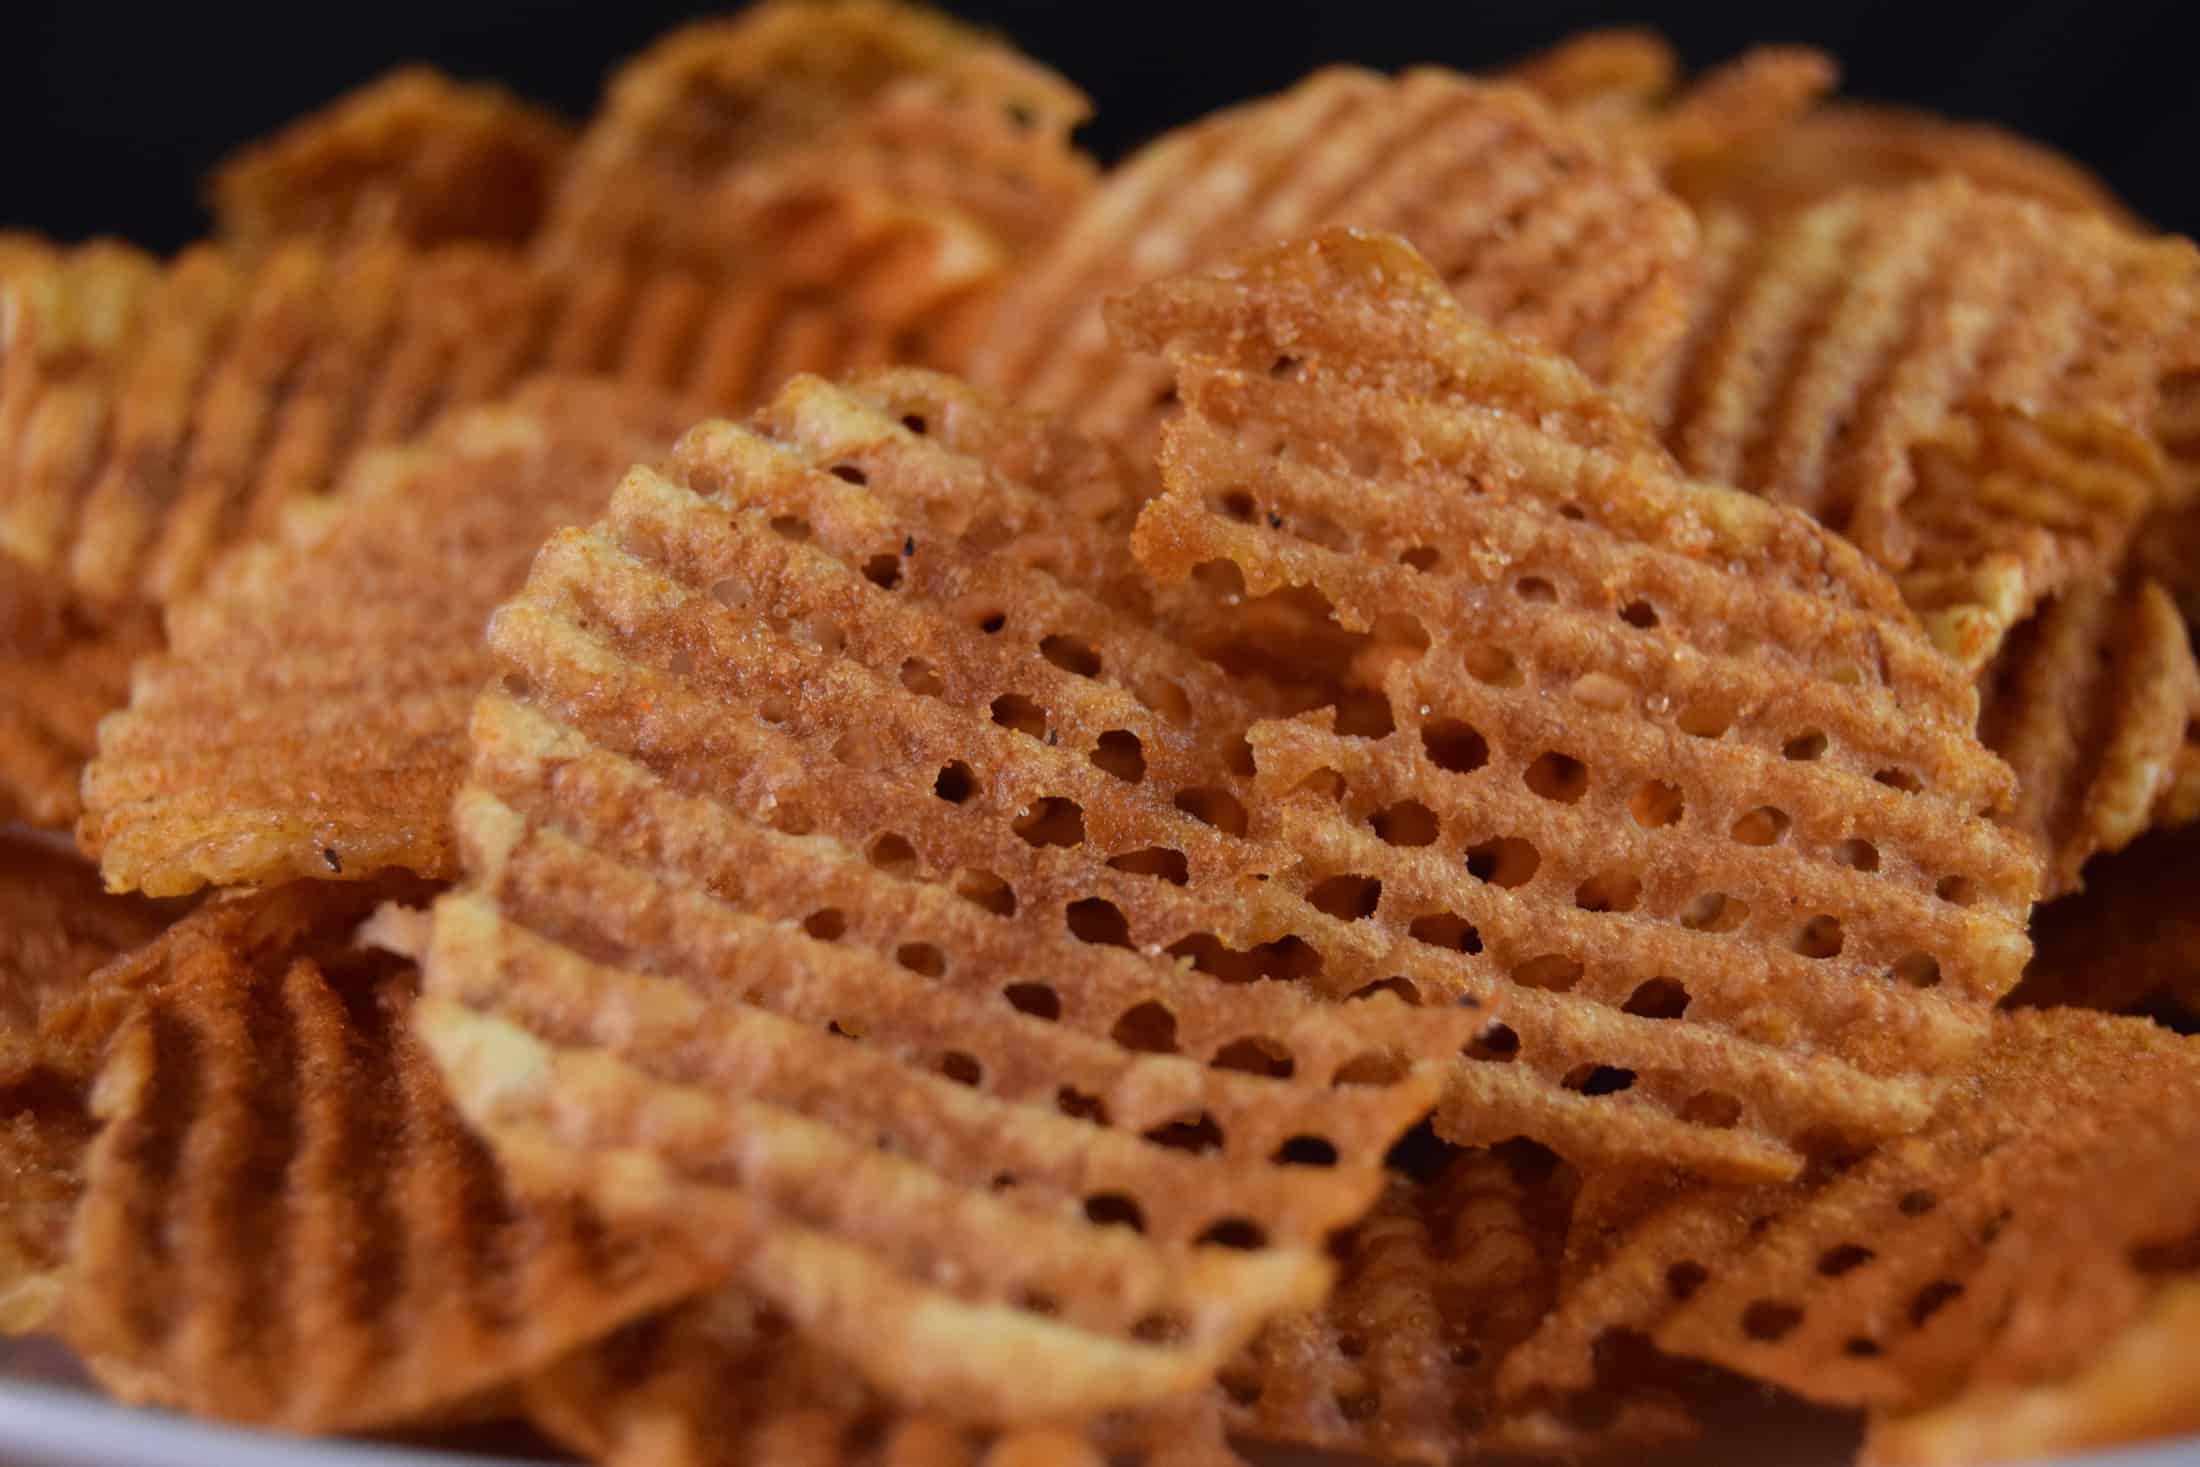 How to make waffle fries